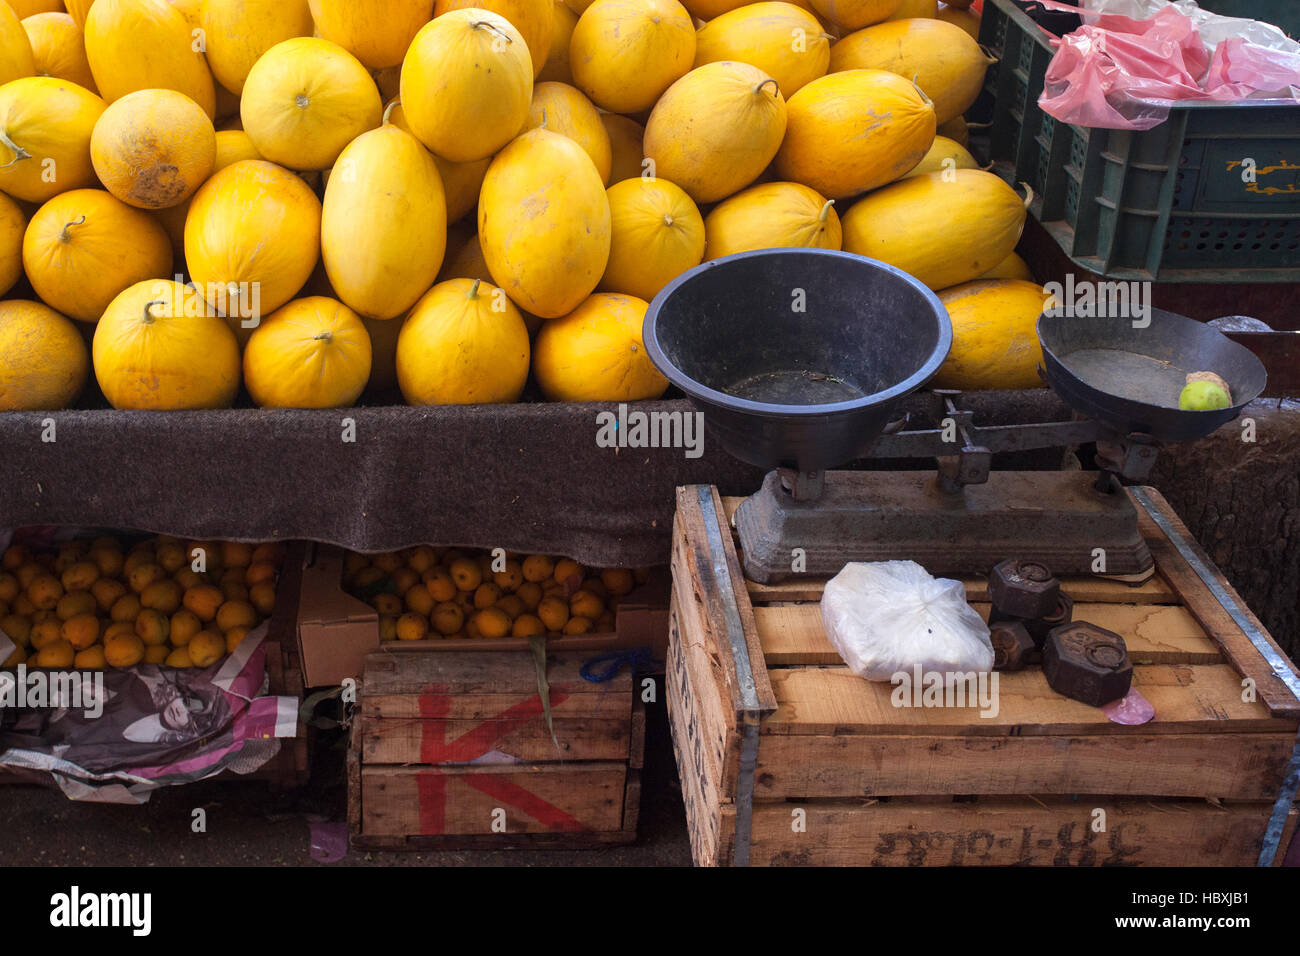 A balance with many yellow melons in a market of Moulay Idriss, Morocco. Stock Photo